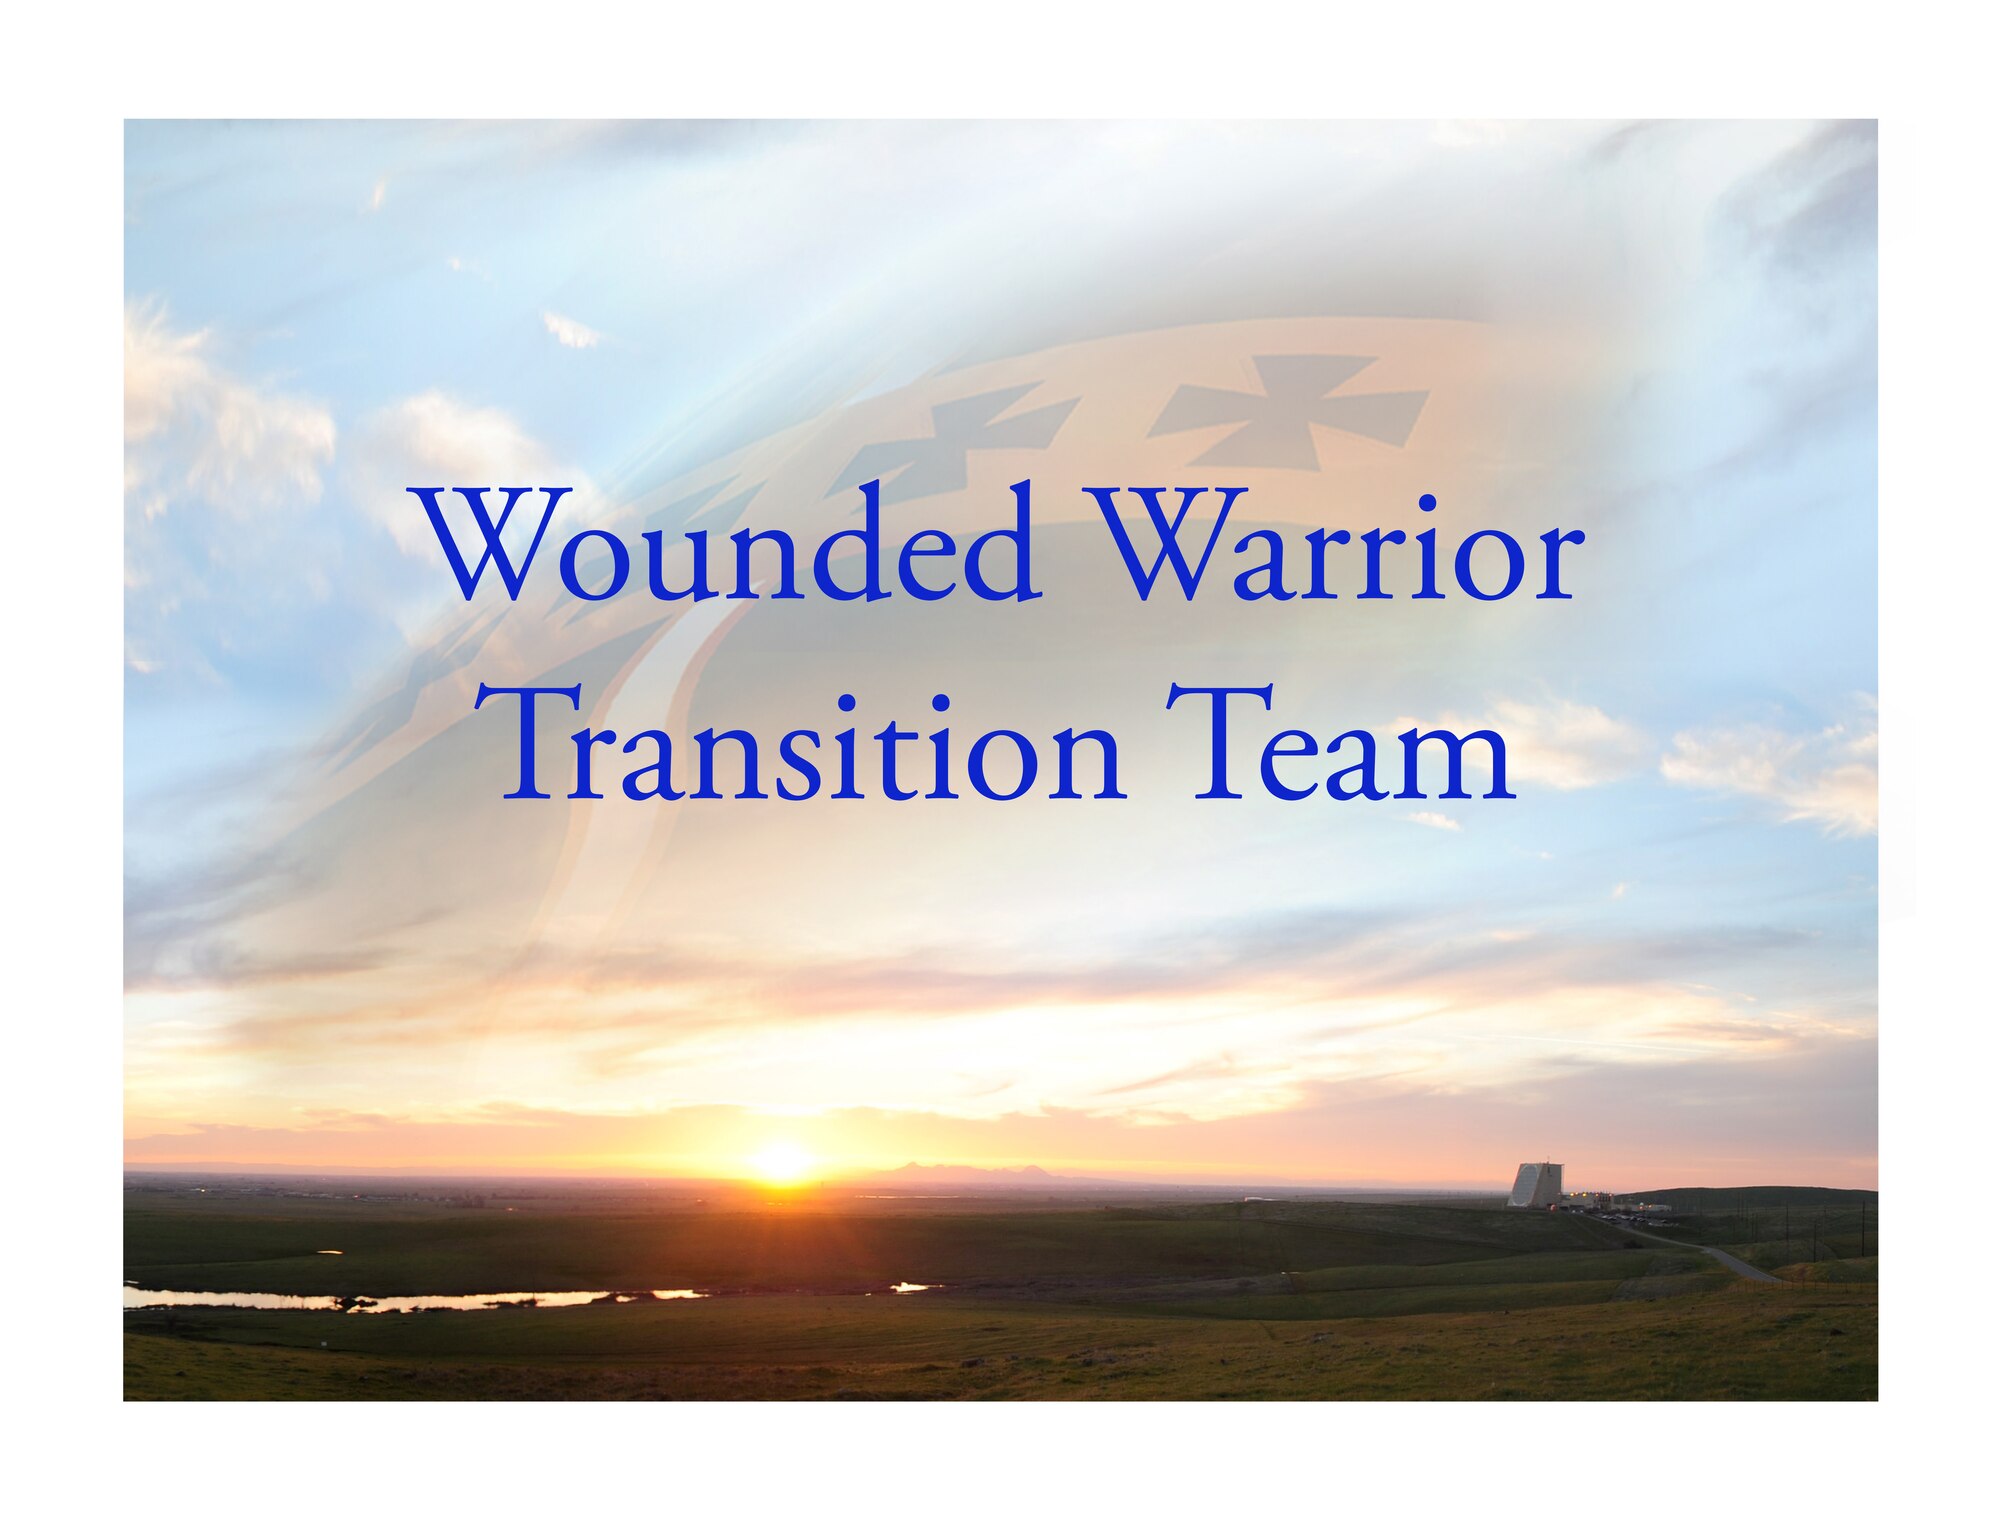 Wounded Warrior Transition Team